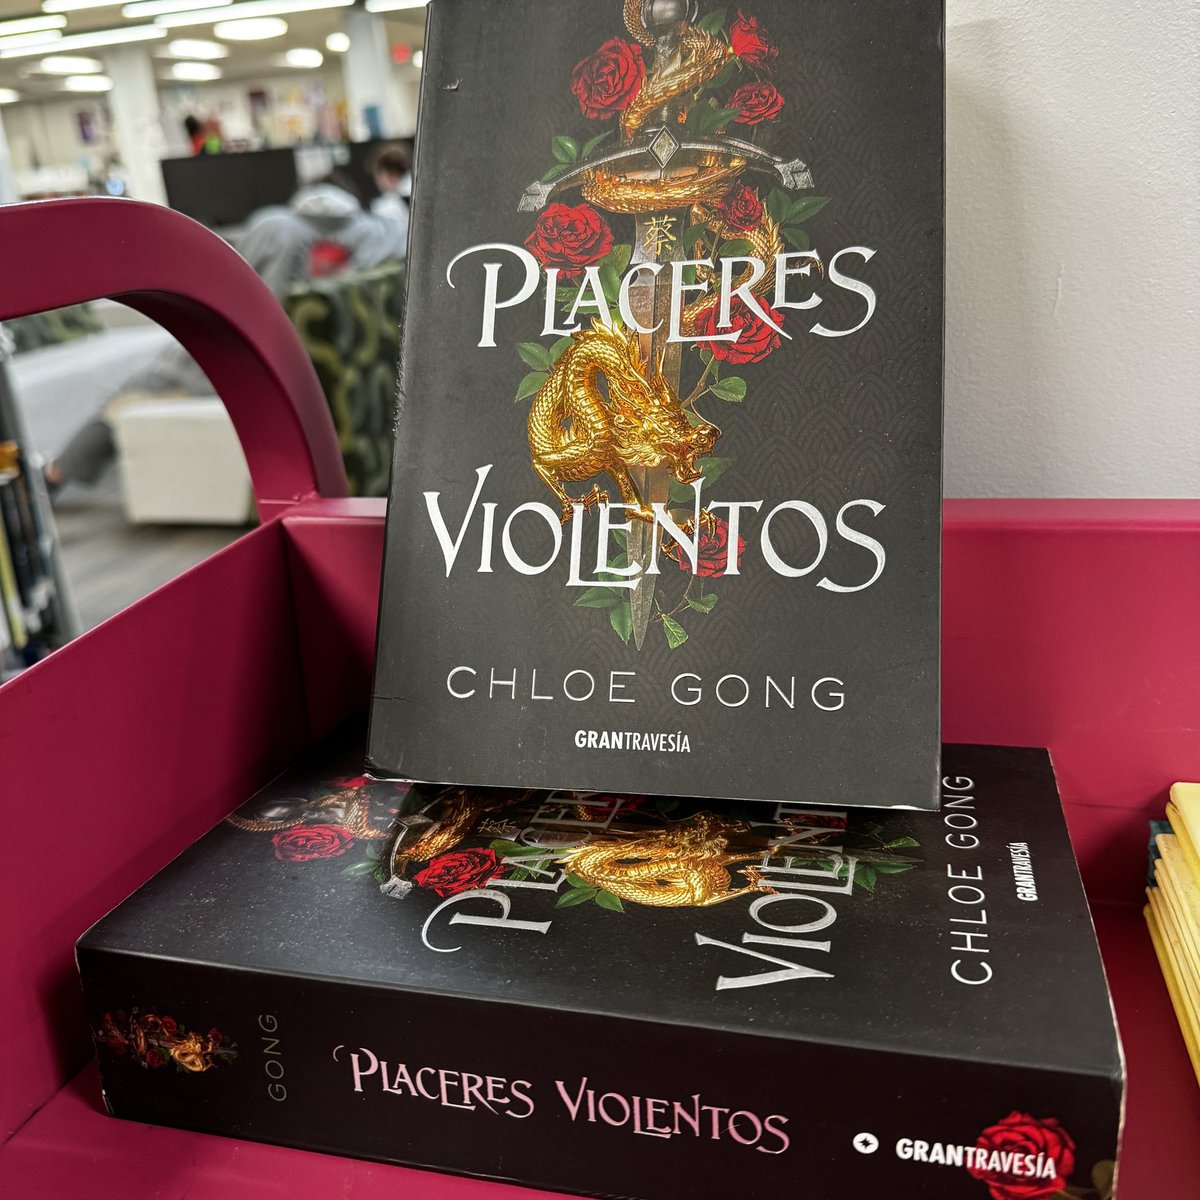 Huge thank you to @thechloegong for sharing Spanish copies with librarians and teachers. I showed these to my biggest Spanish reading fans and they are so excited for when these come back from cataloging!